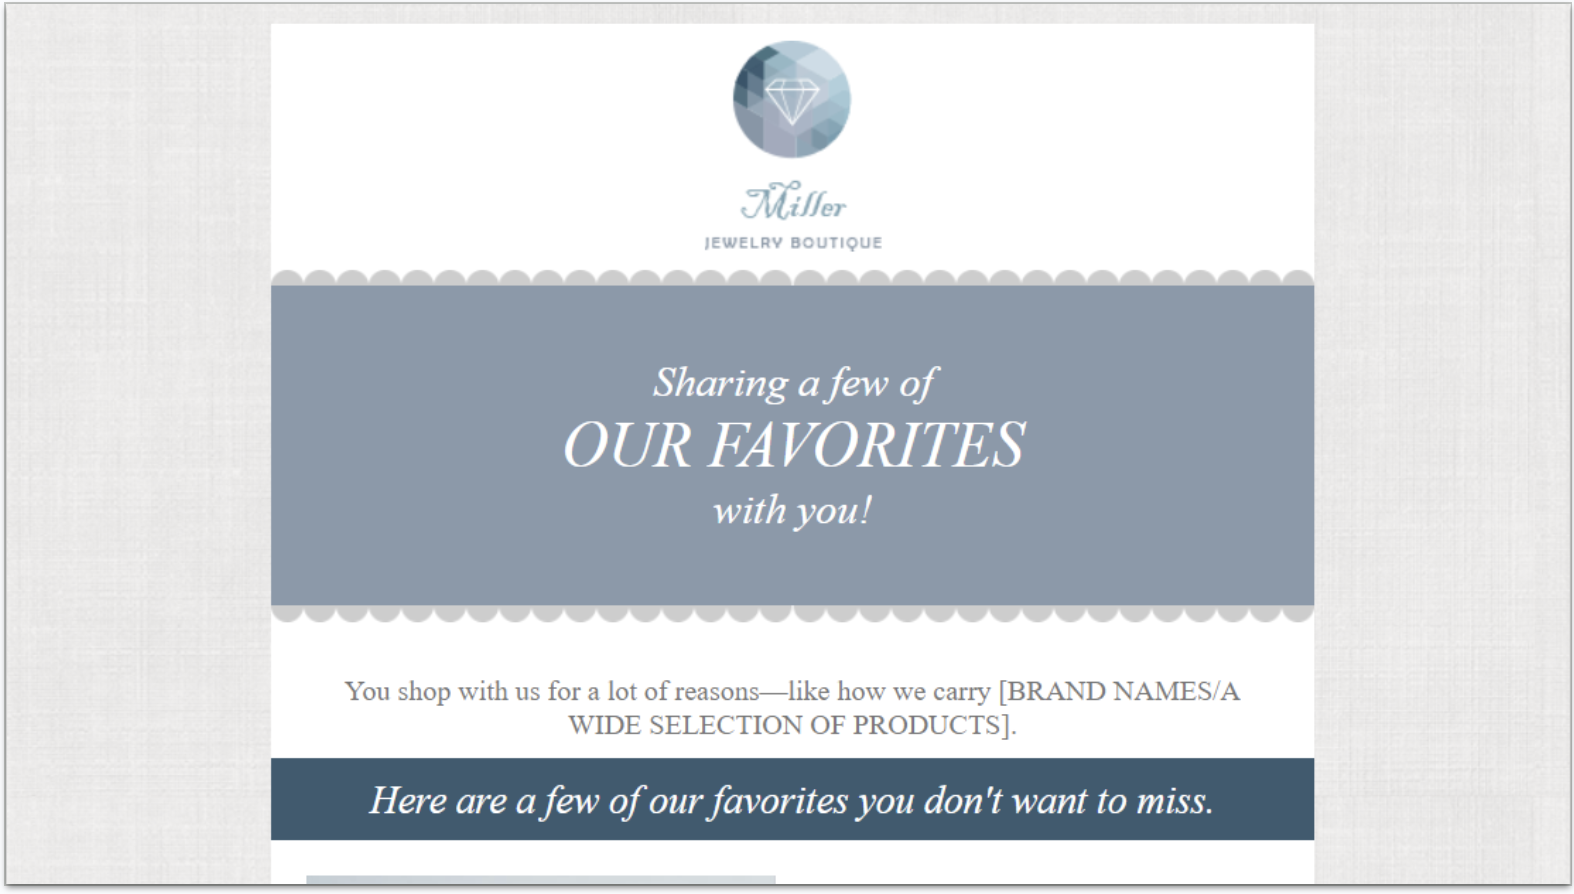 The Showcase email template from Constant Contact